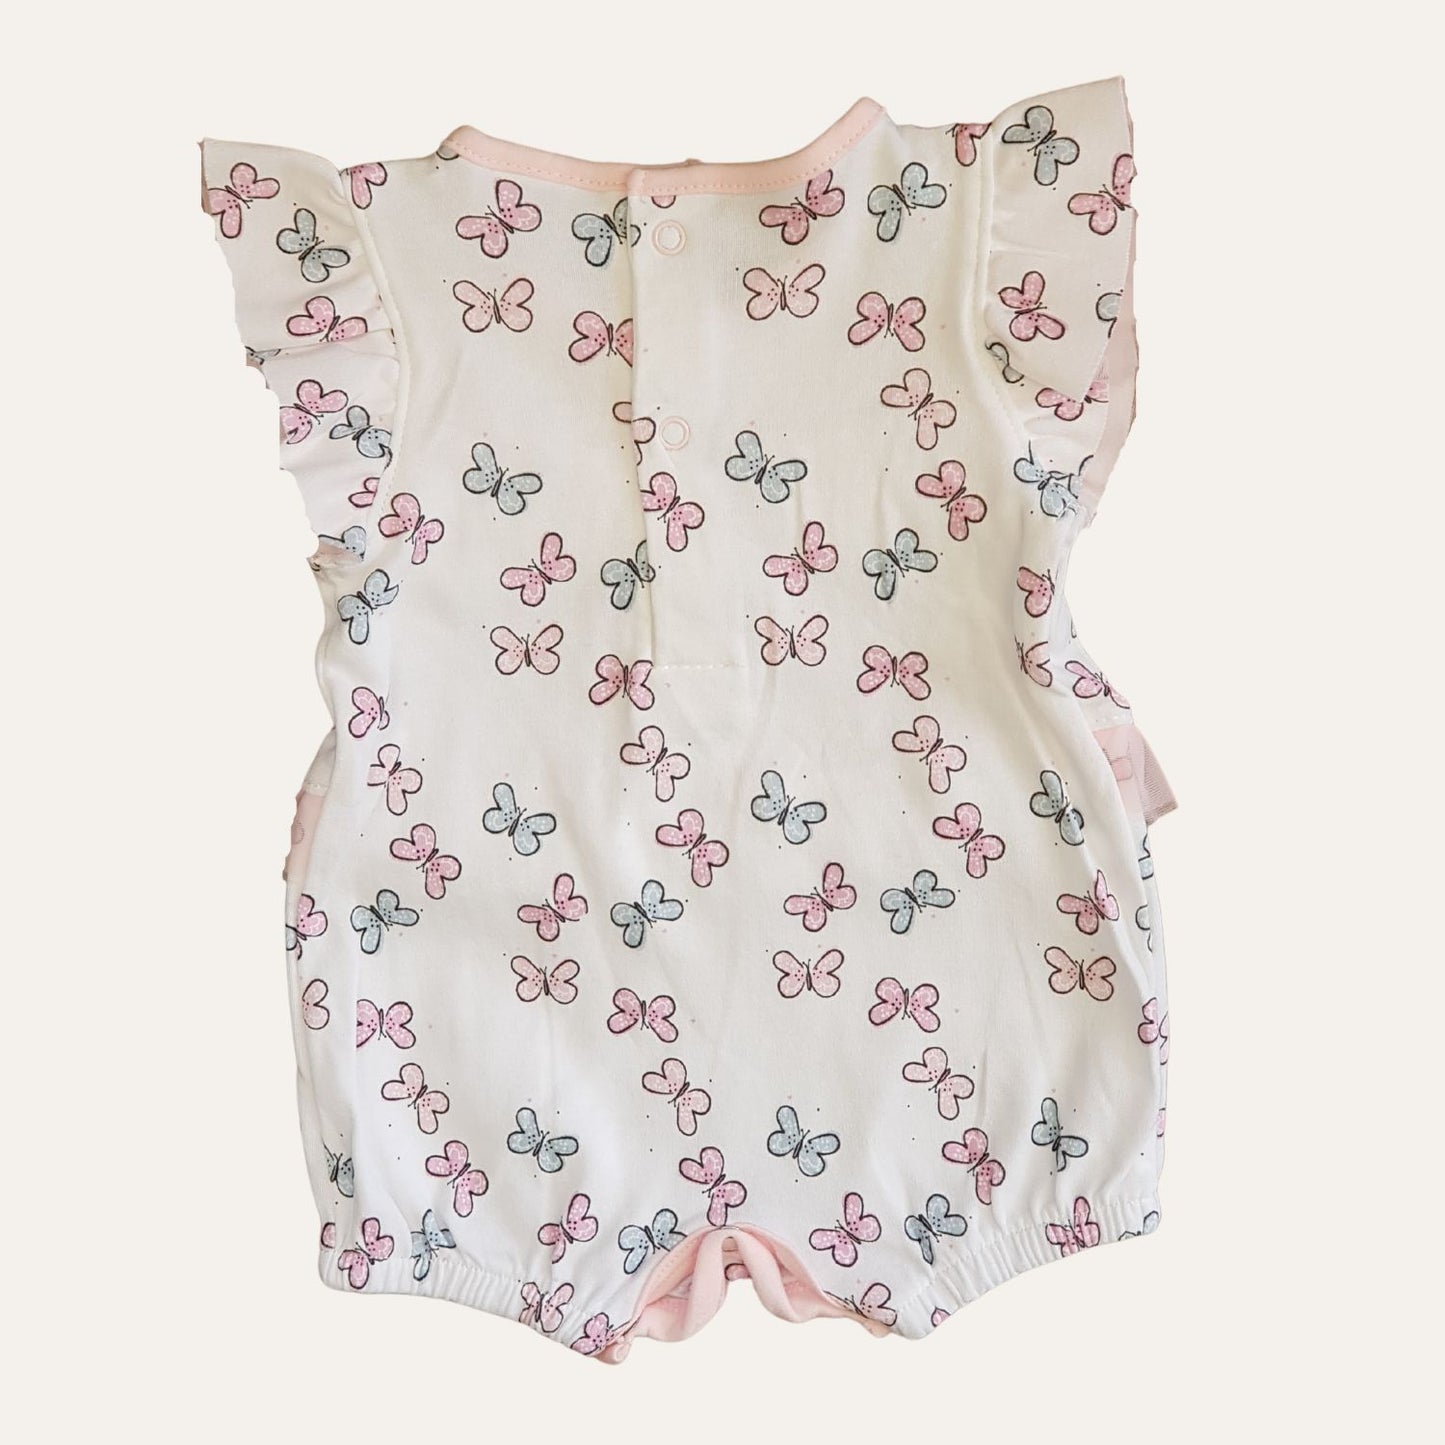 Cute and Fashionable Romper for Your Little Girl